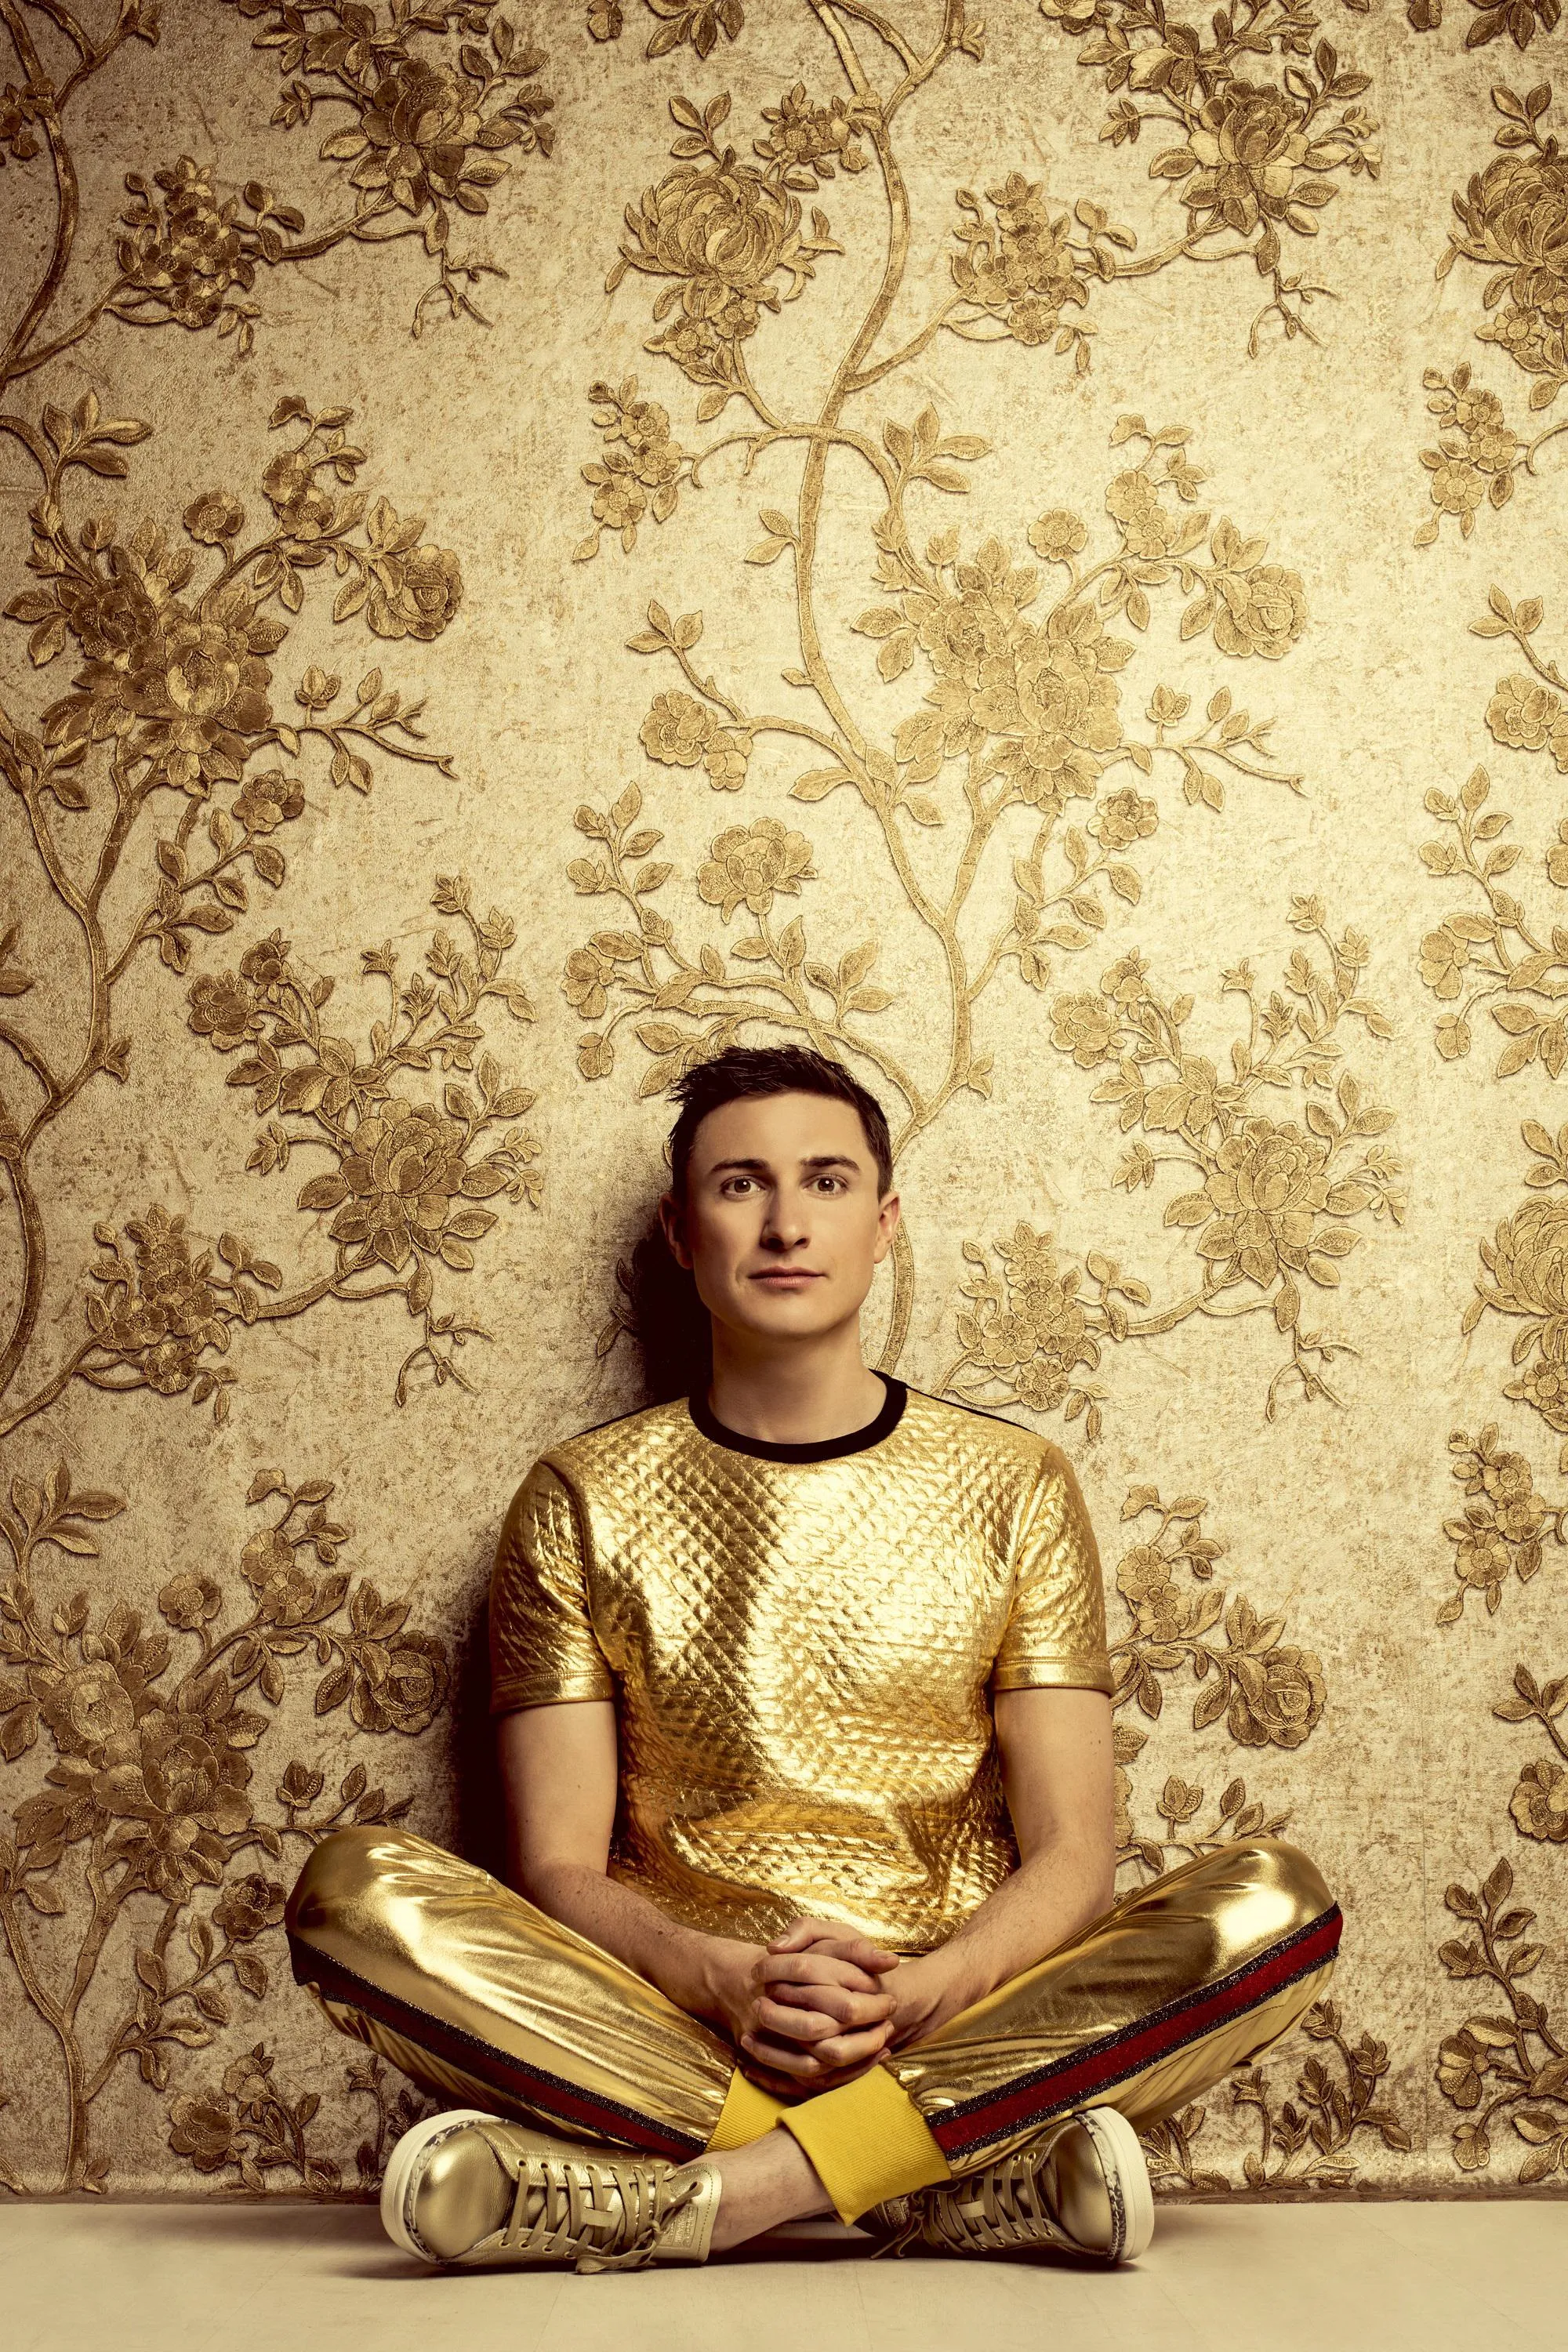 Tom Rosenthal, Photo by Idil Sukan